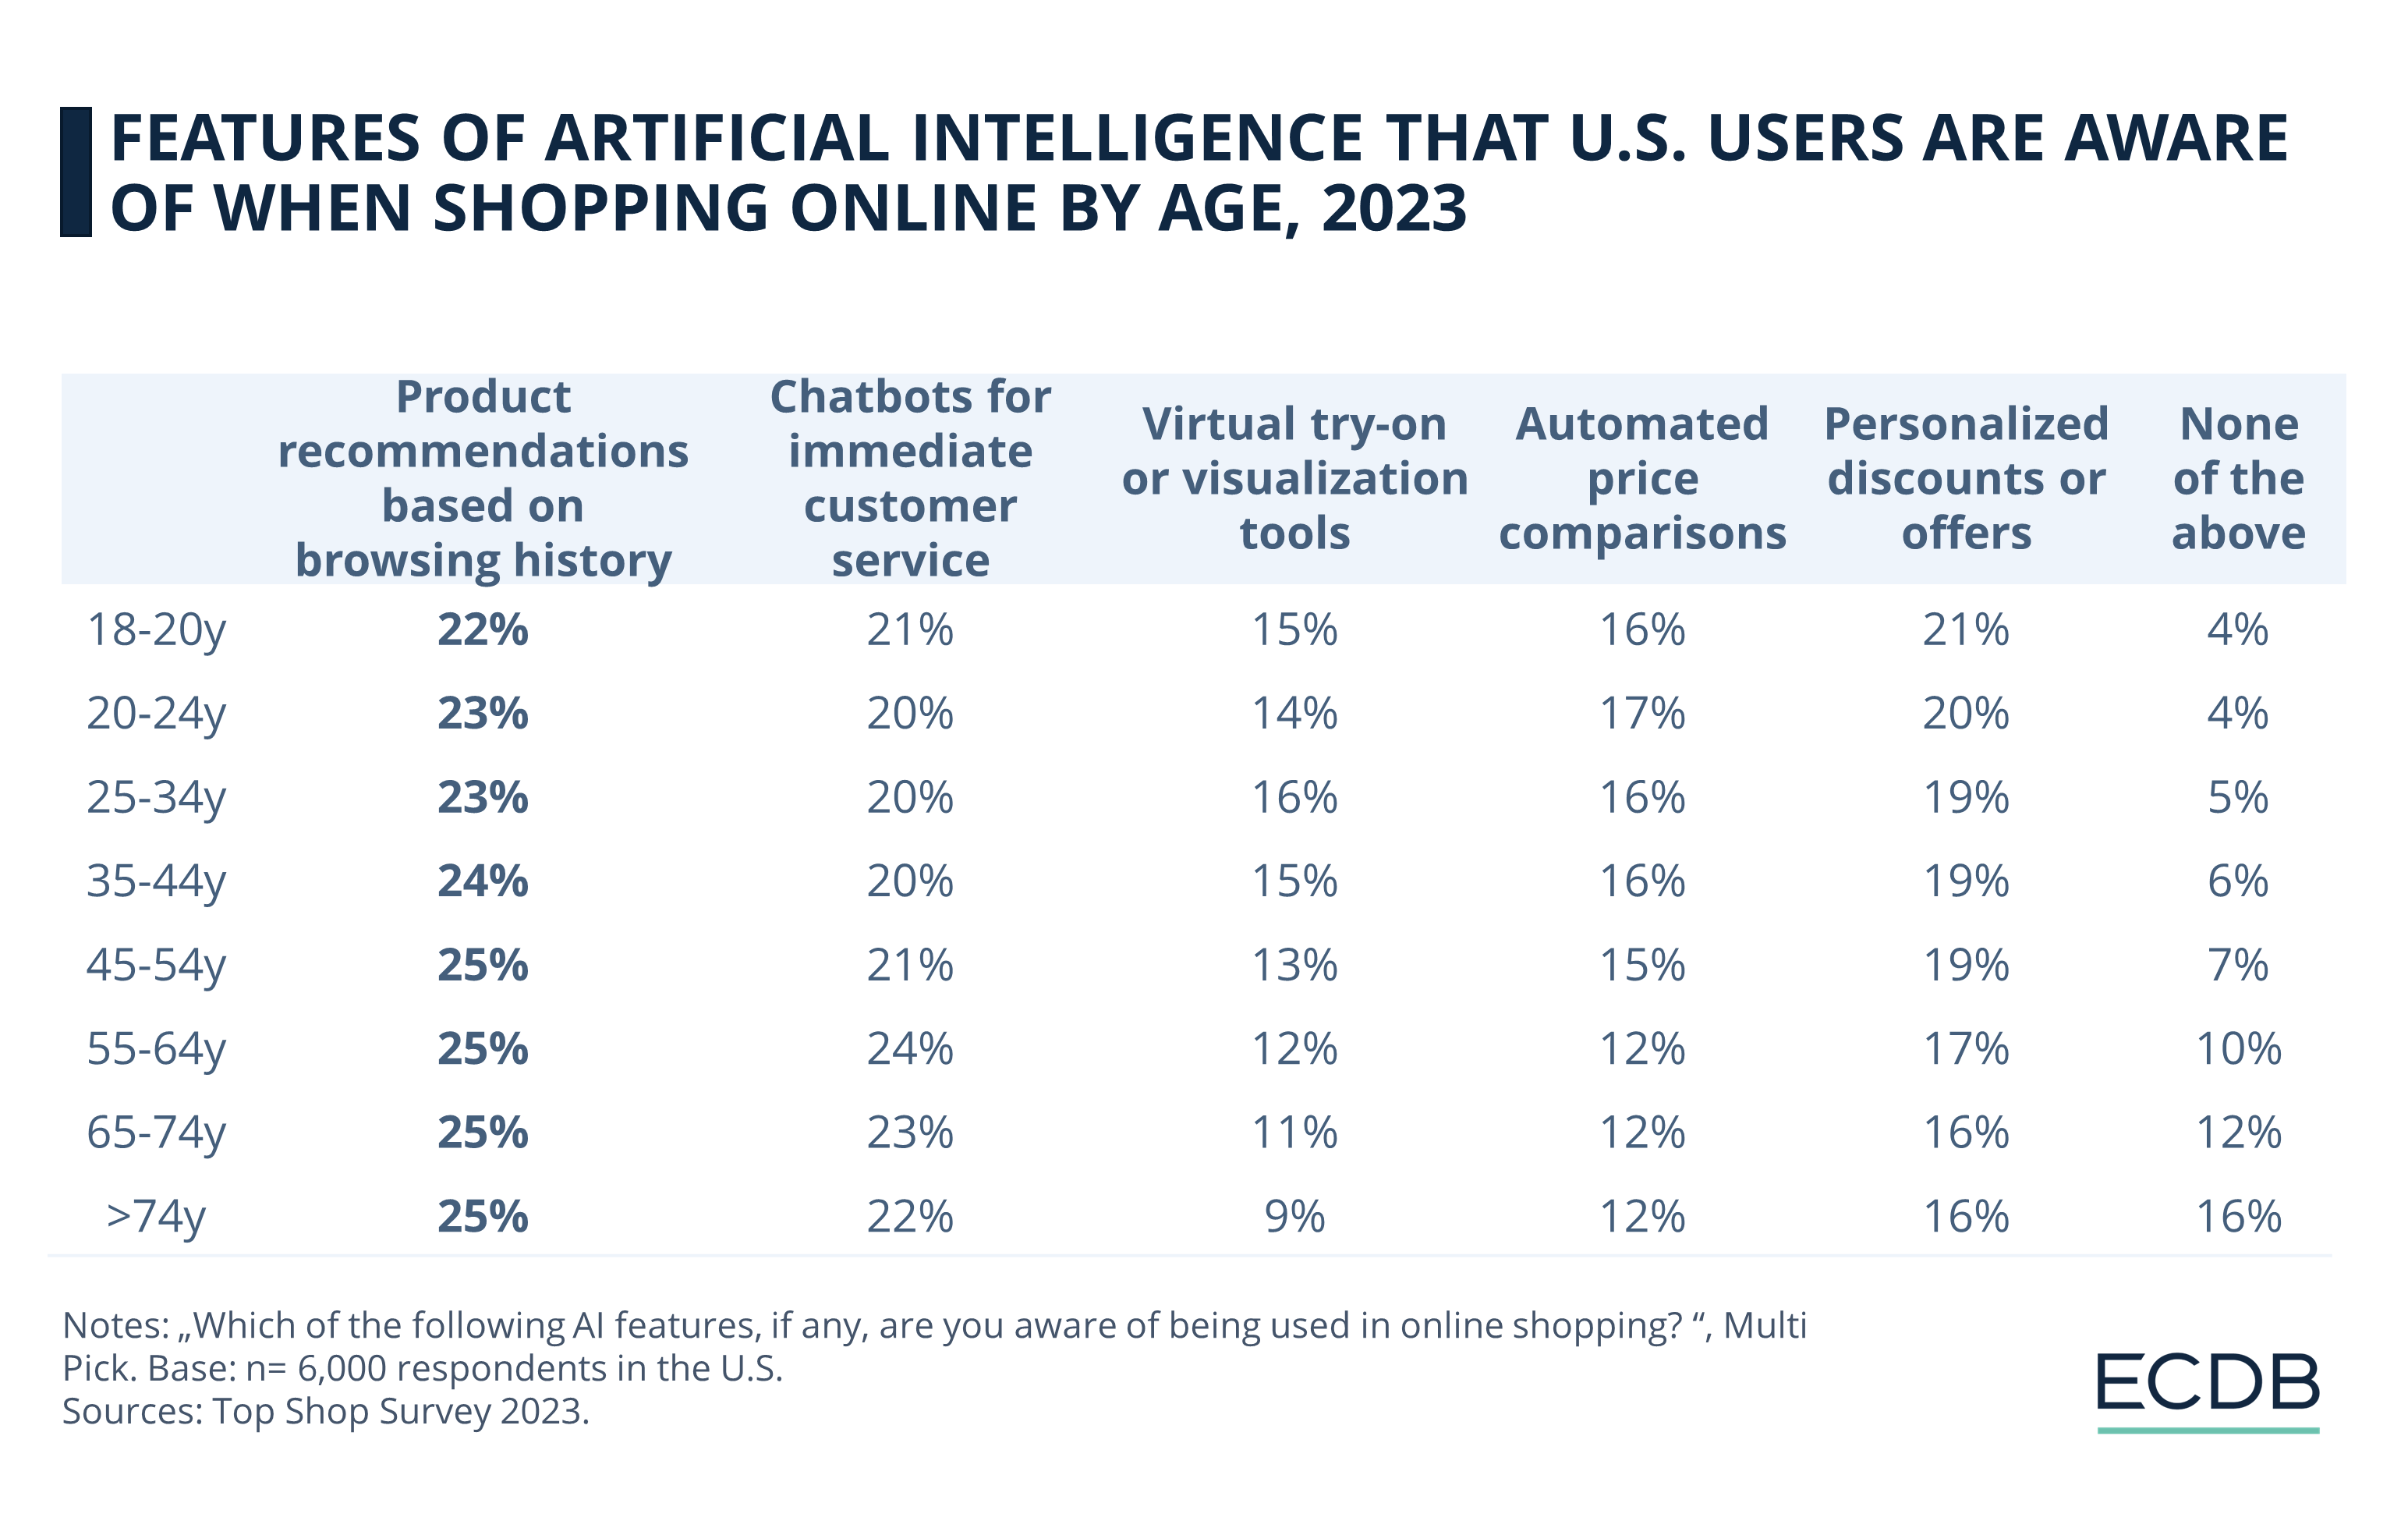 Features of AI That U.S. Users Are Aware Of When Shopping Online by Age, 2023